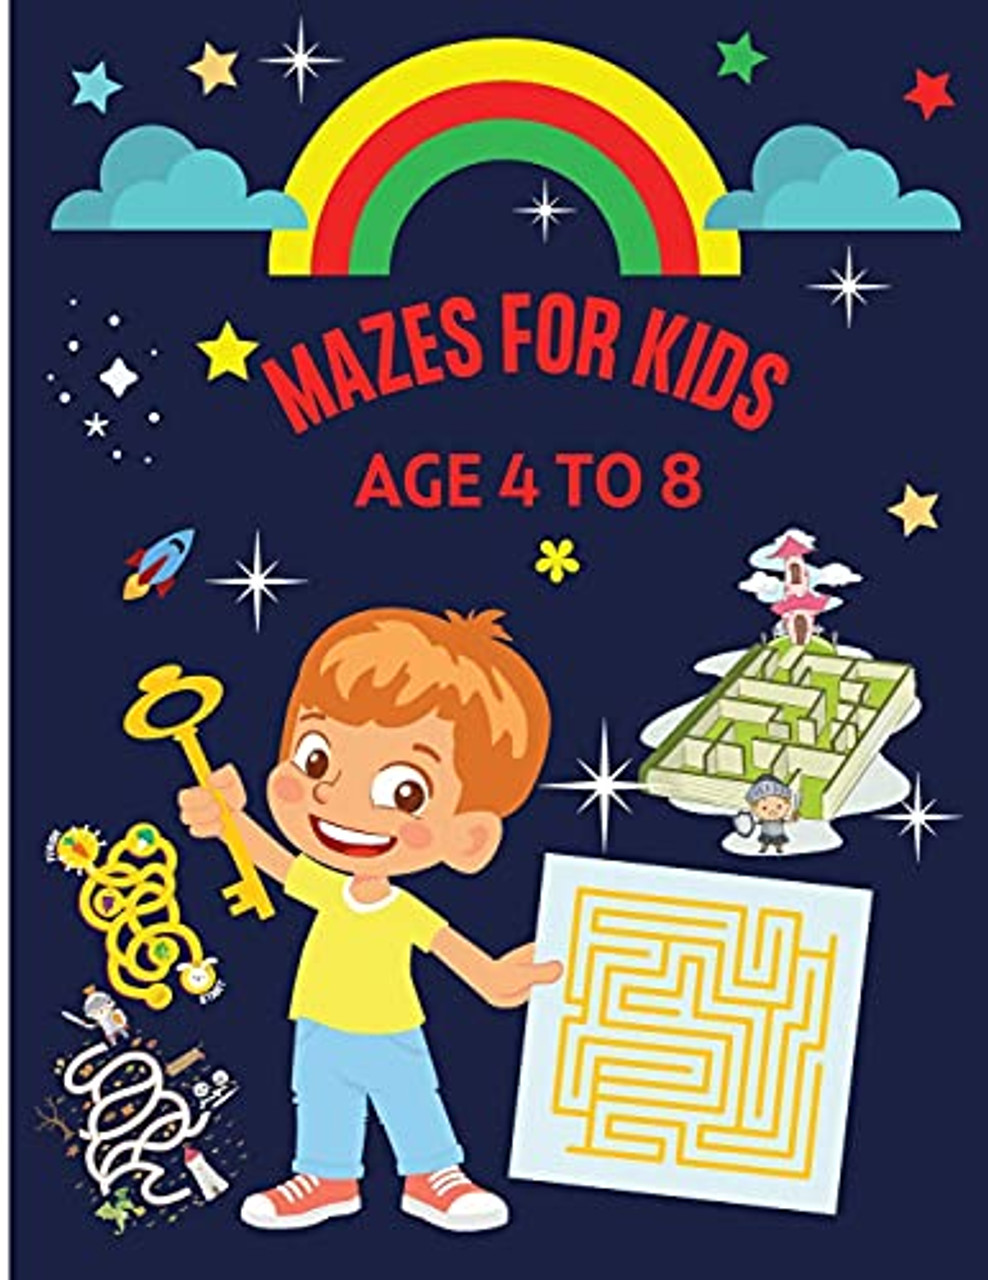 Mazes For Kids Ages 4-8: Turtle Maze Activity Book 4-6, 6-8